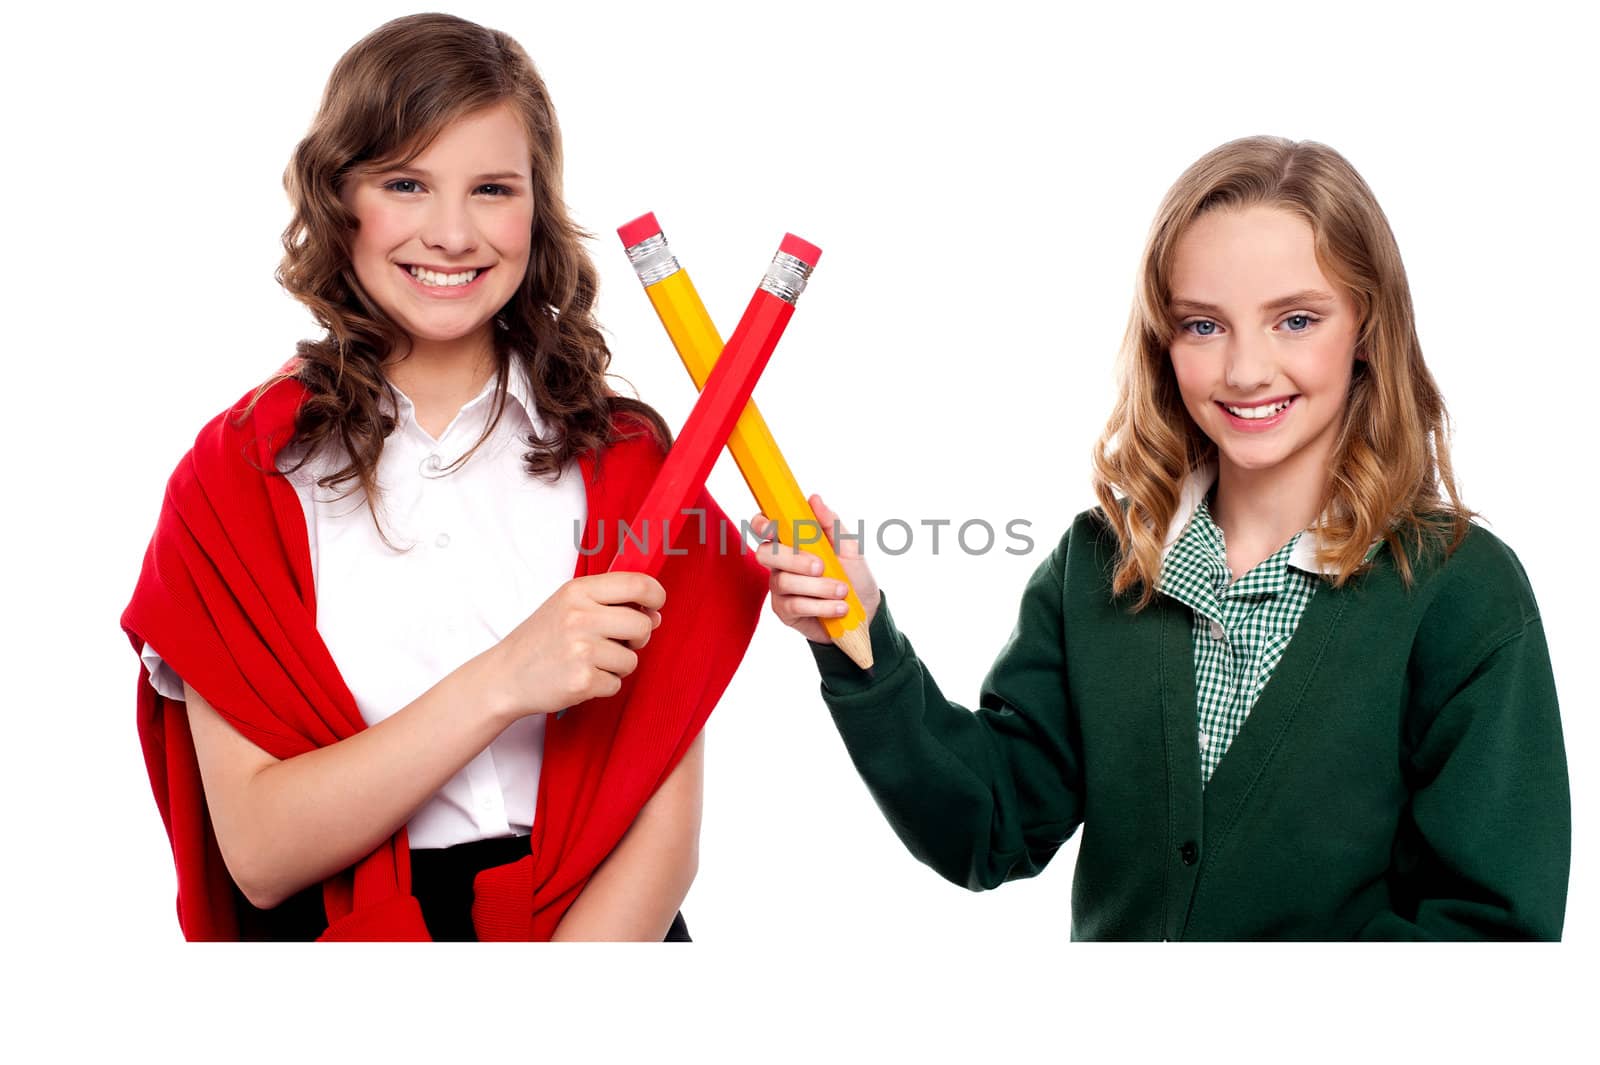 Smiling teenagers making cross sign with over sized pencils. All on white background